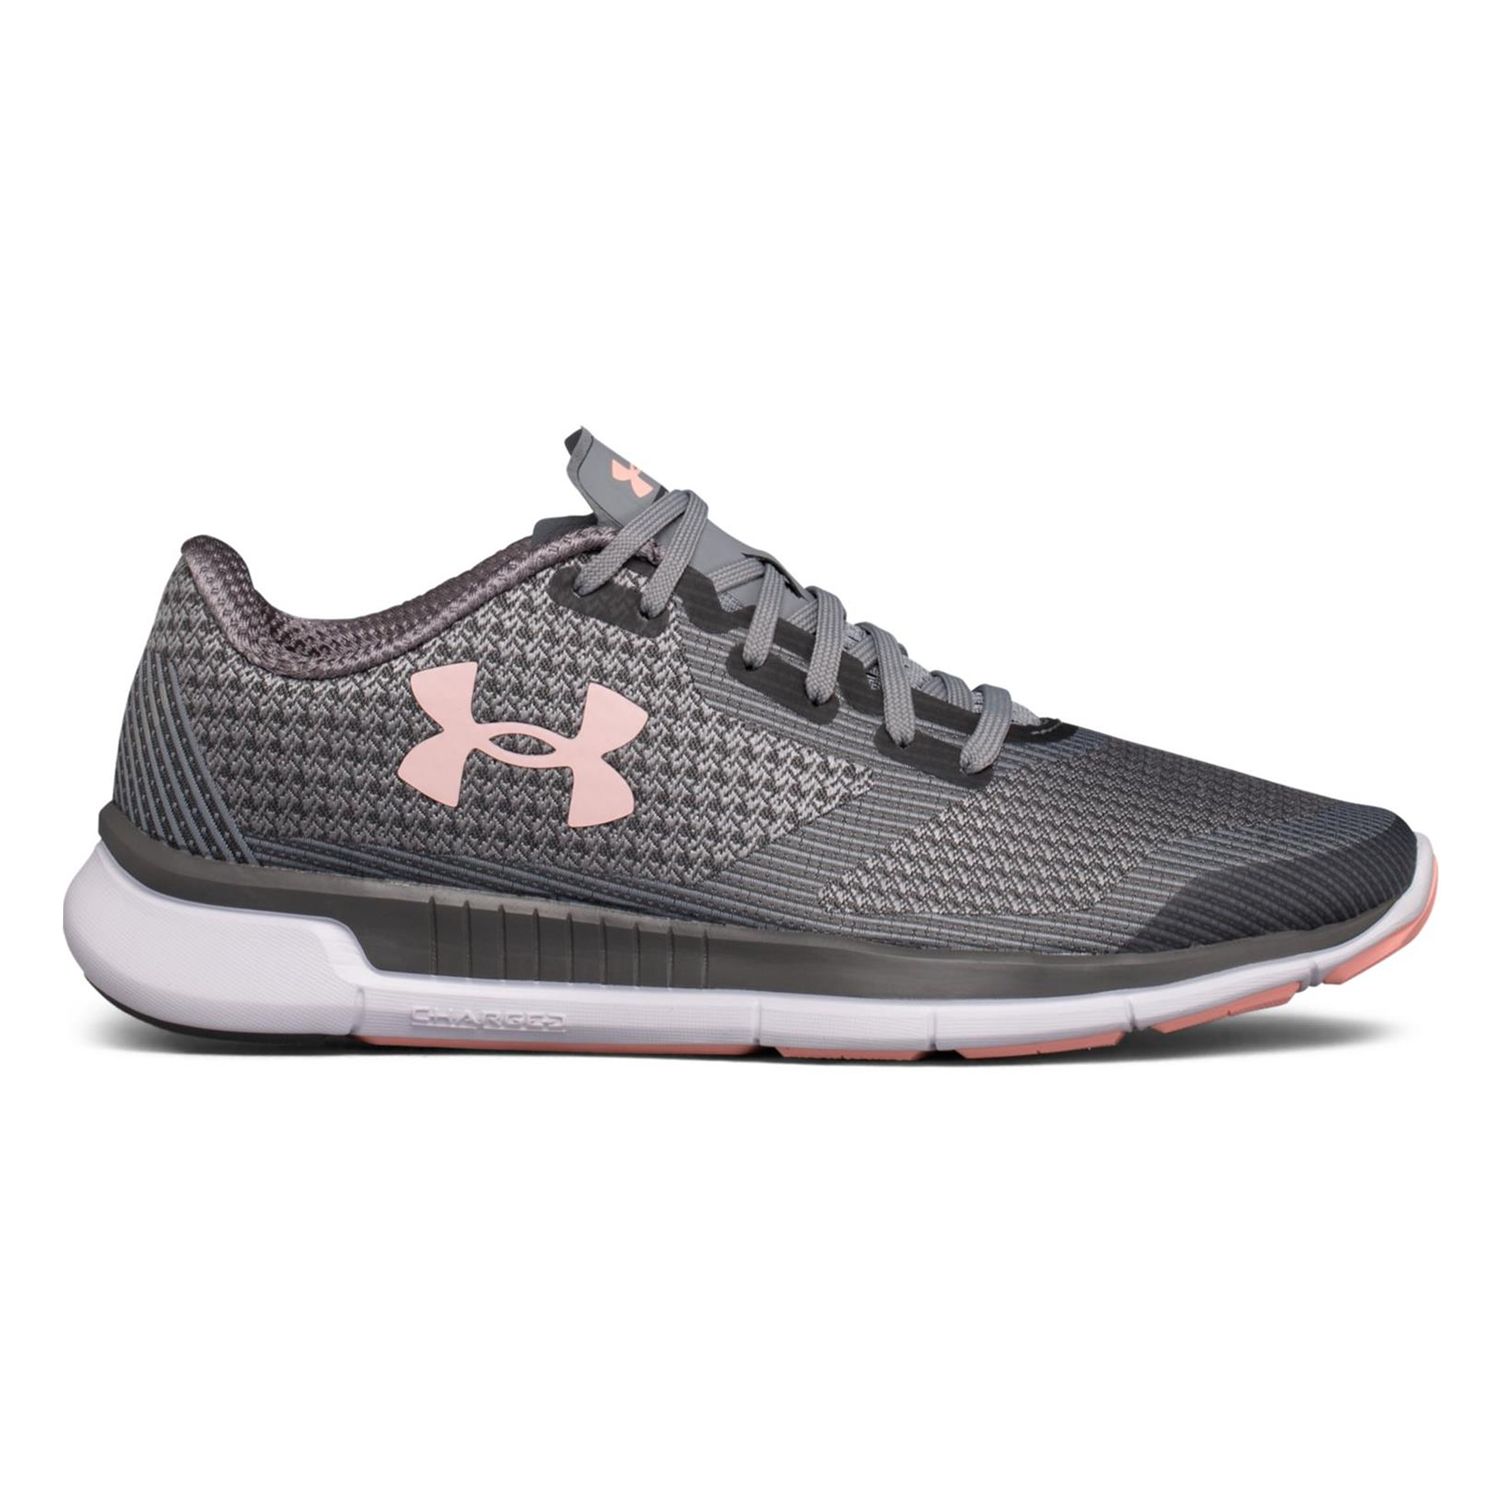 Under Armour 1285681-001-13 Mens Charged Lightning Running-Shoes 